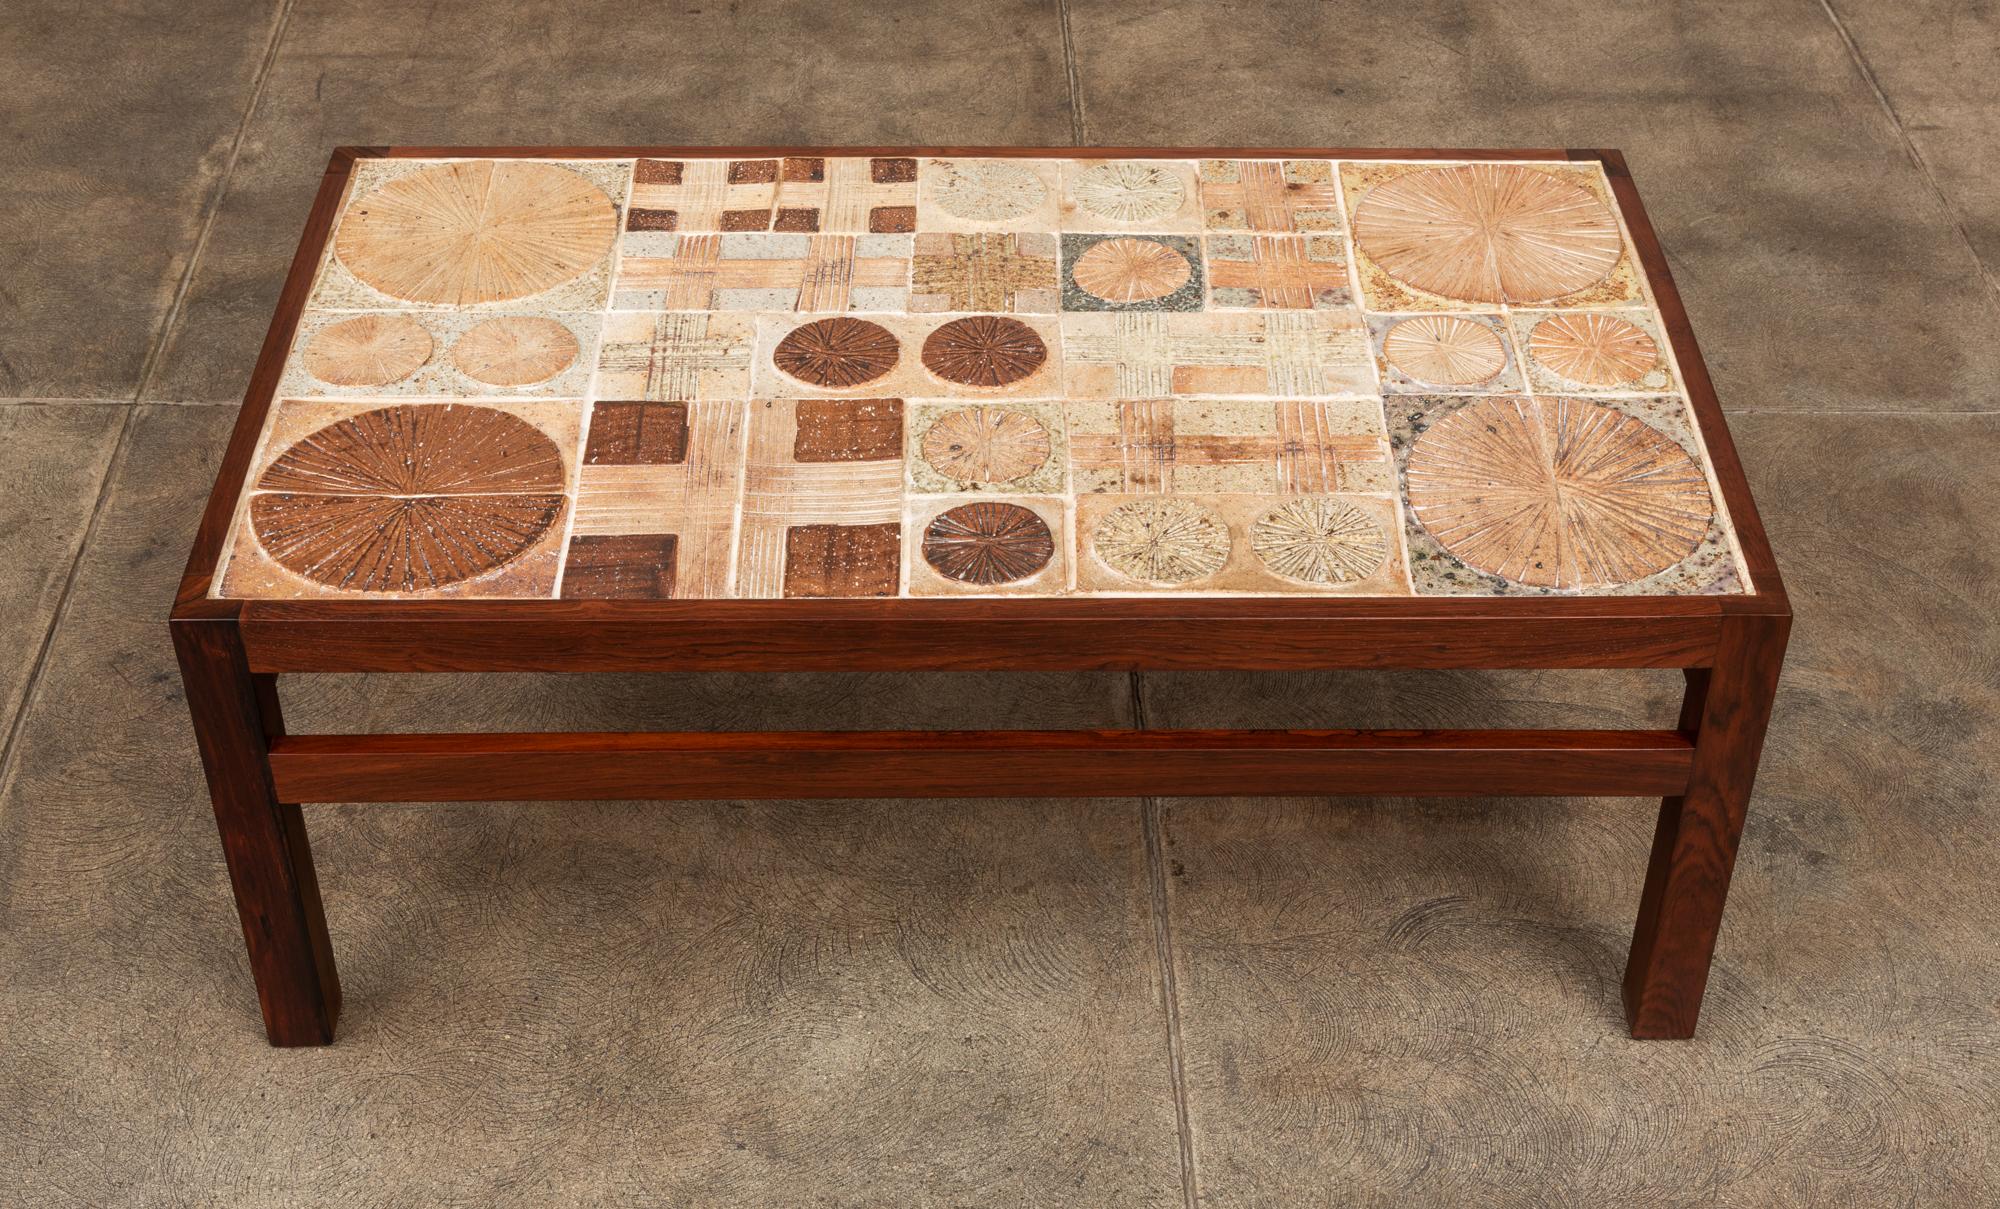 Rosewood and Mosaic Tile Coffee Table by Tue Poulsen 2